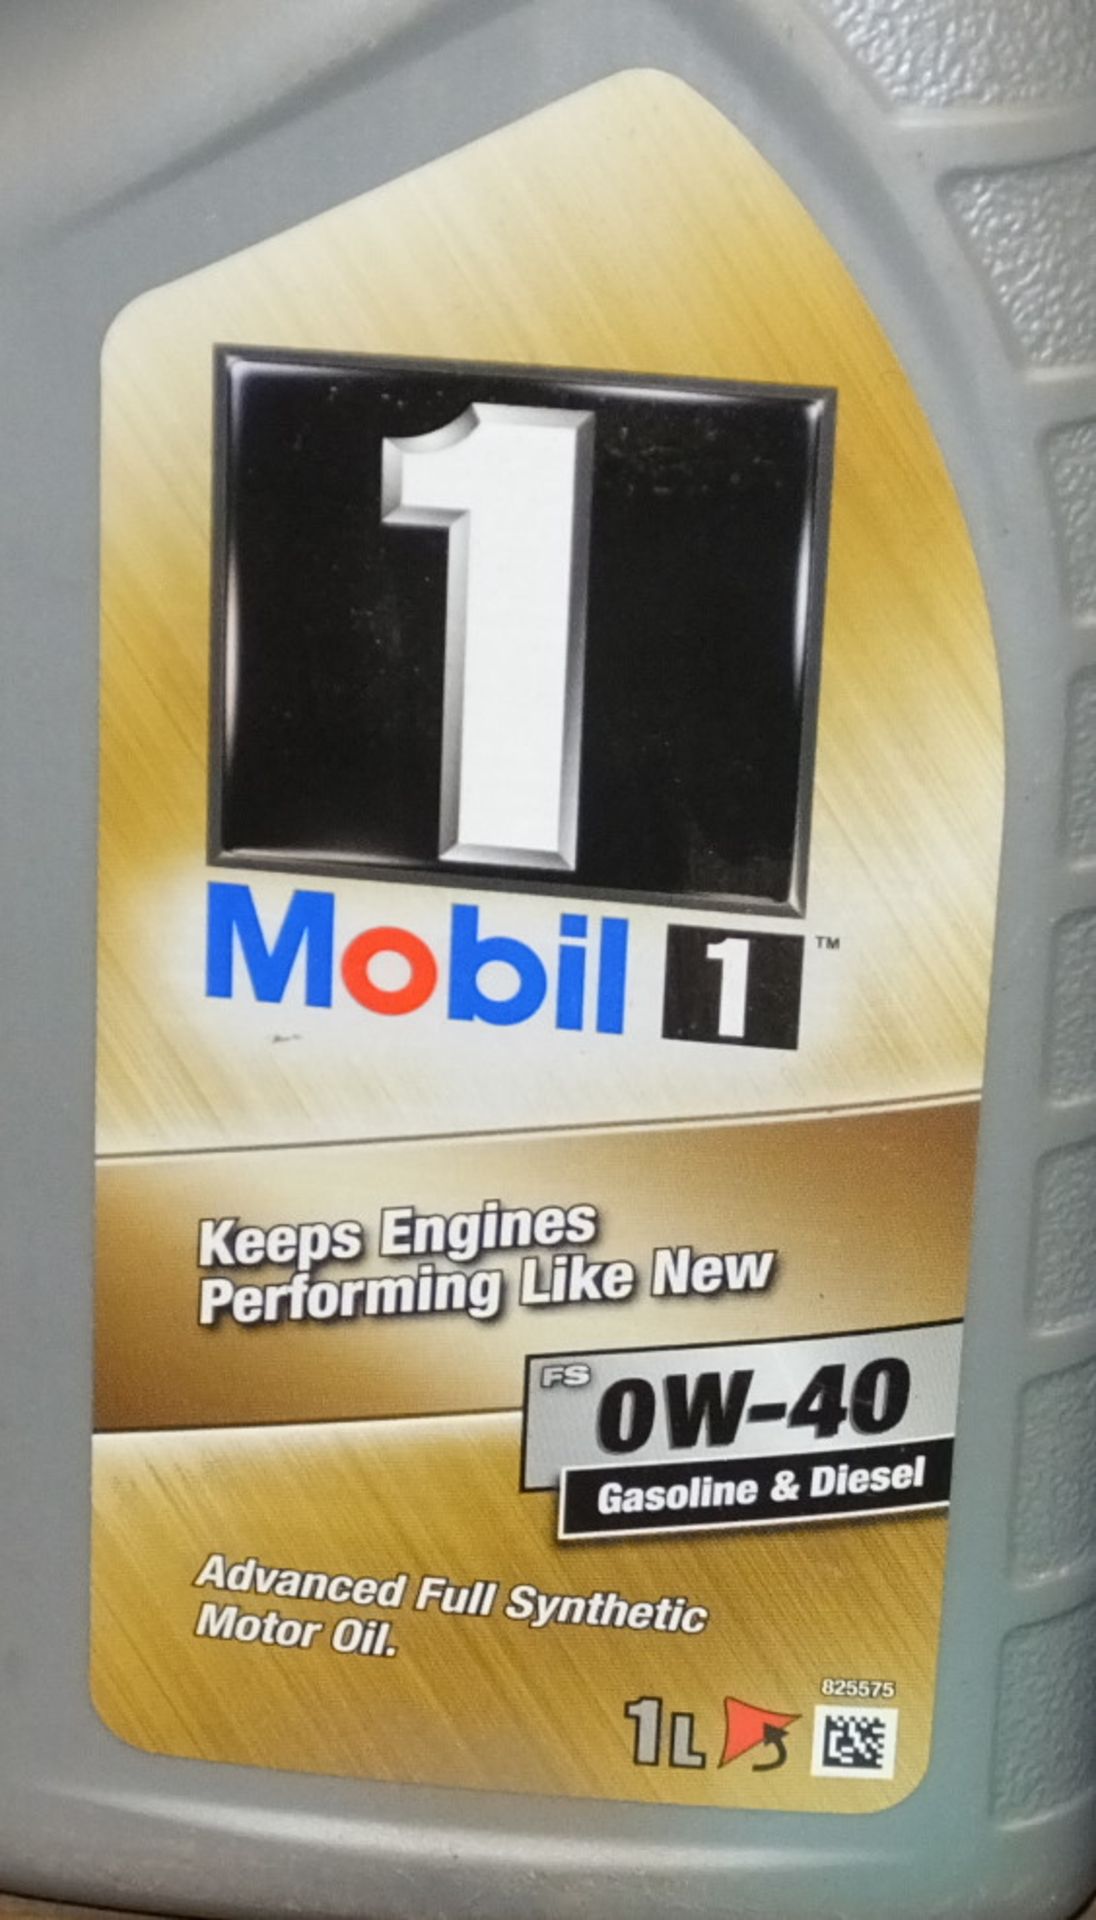 10x Mobil 1 FS 0W-40 Advanced Full Synthetic Motor Oil - 1L - Image 2 of 2